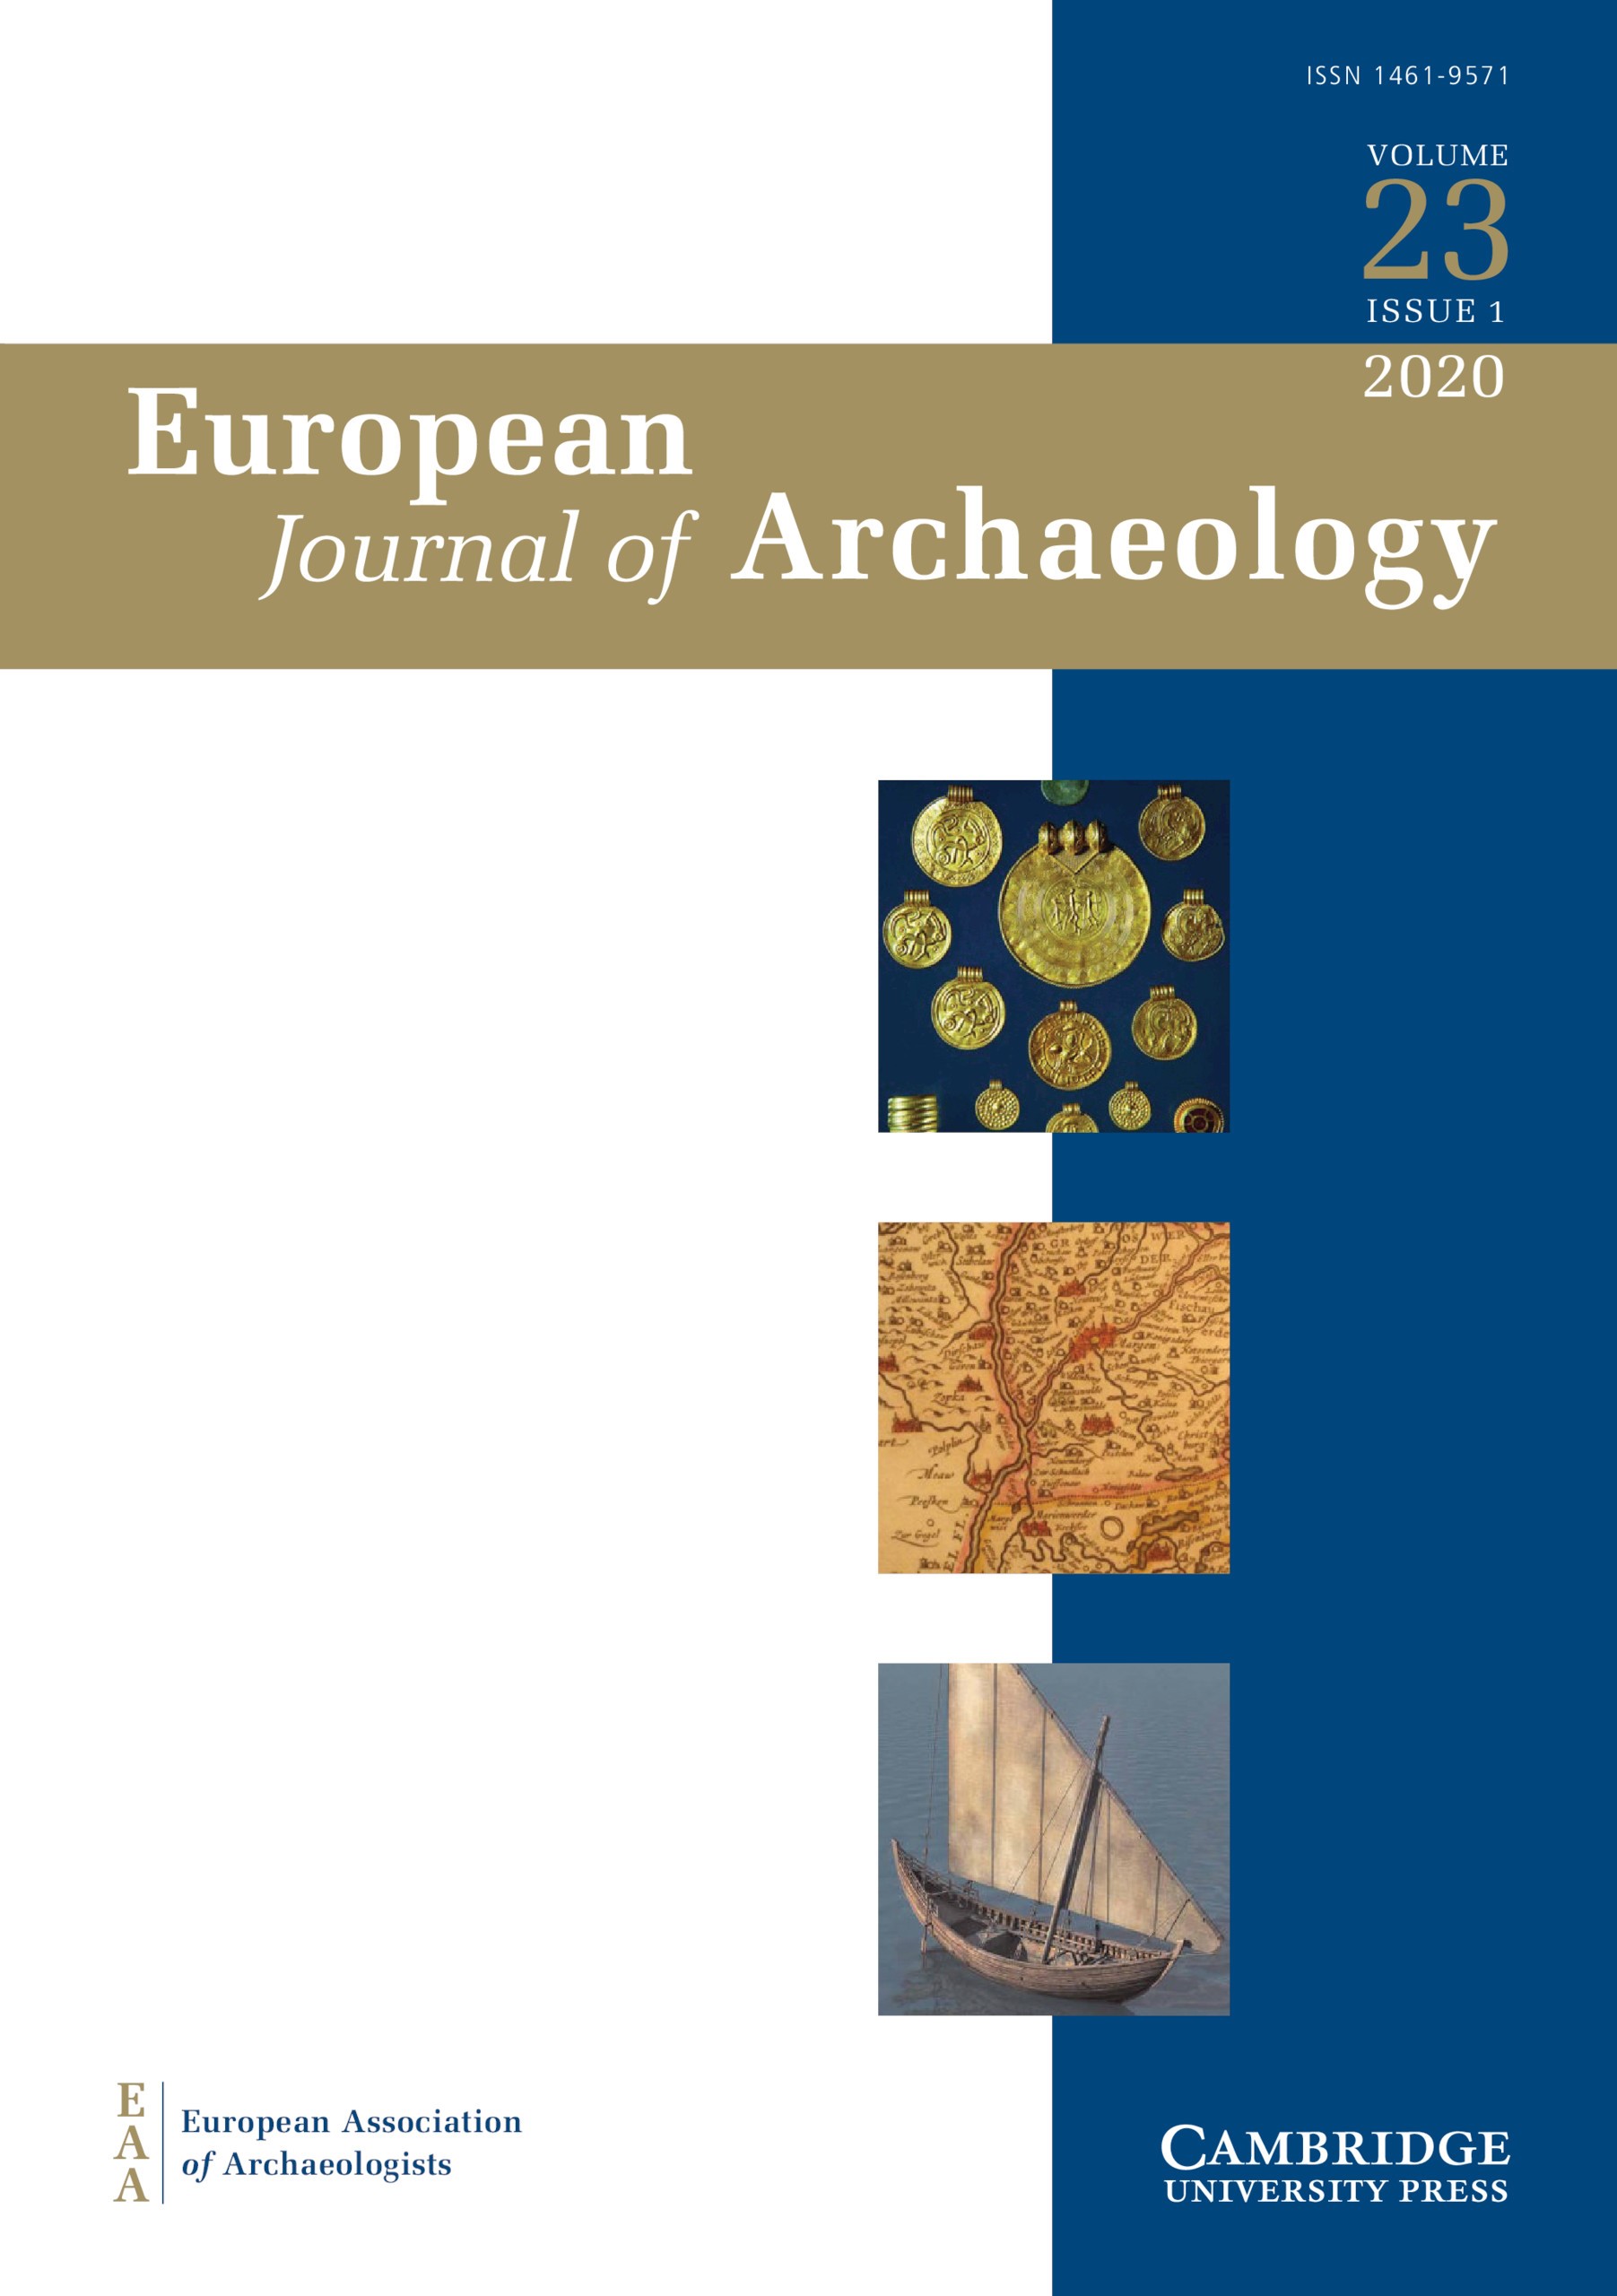 Título: Saguntum: The Remains of an Honorary Arch and Urban Planning Outside the City Walls (European Journal of Archaeology, 23. 1, 2020). doi:10.1017/eaa.2019.43 